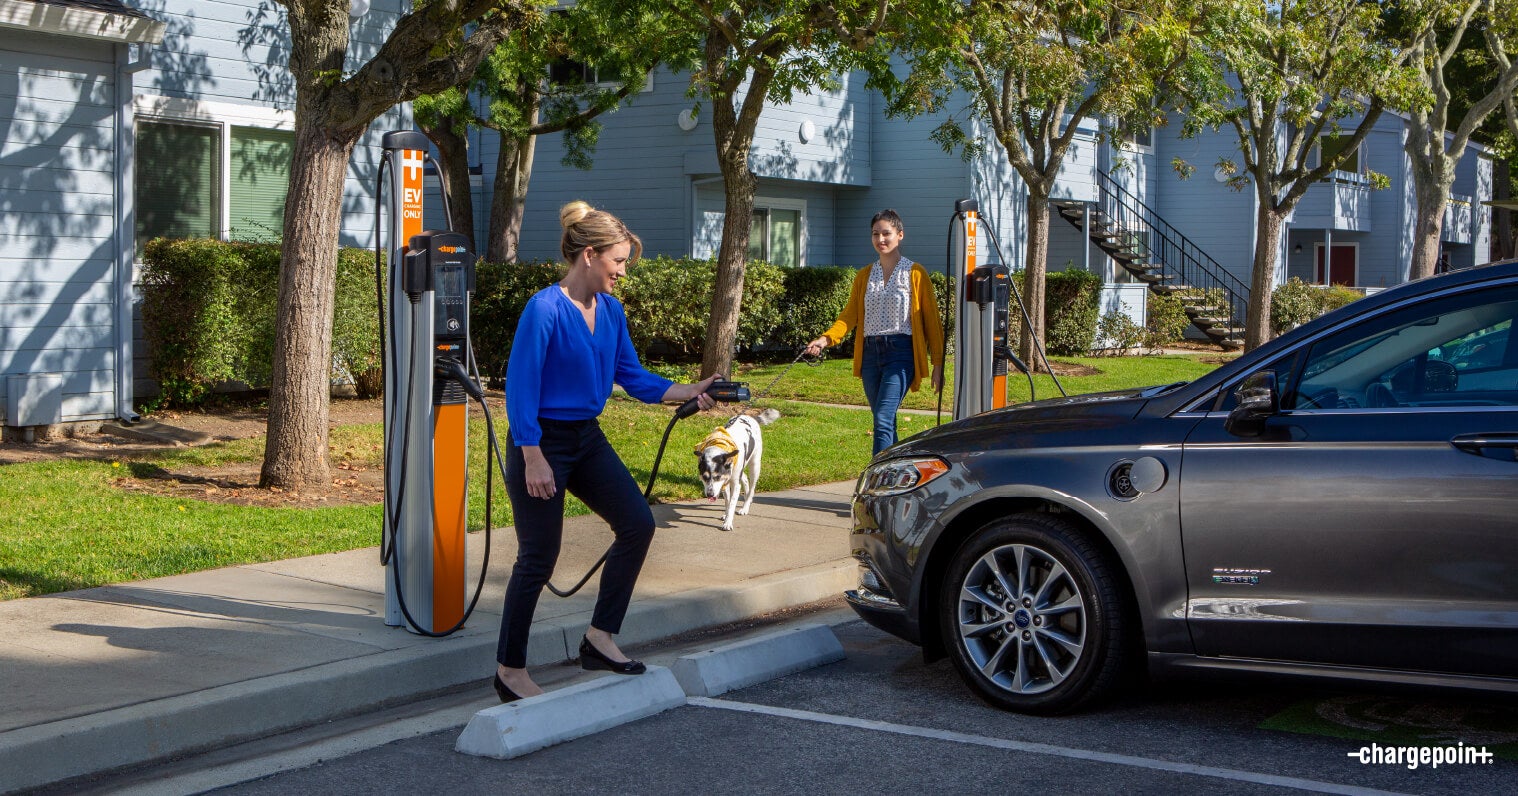 Incentives Help Install EV Charging Where Needed